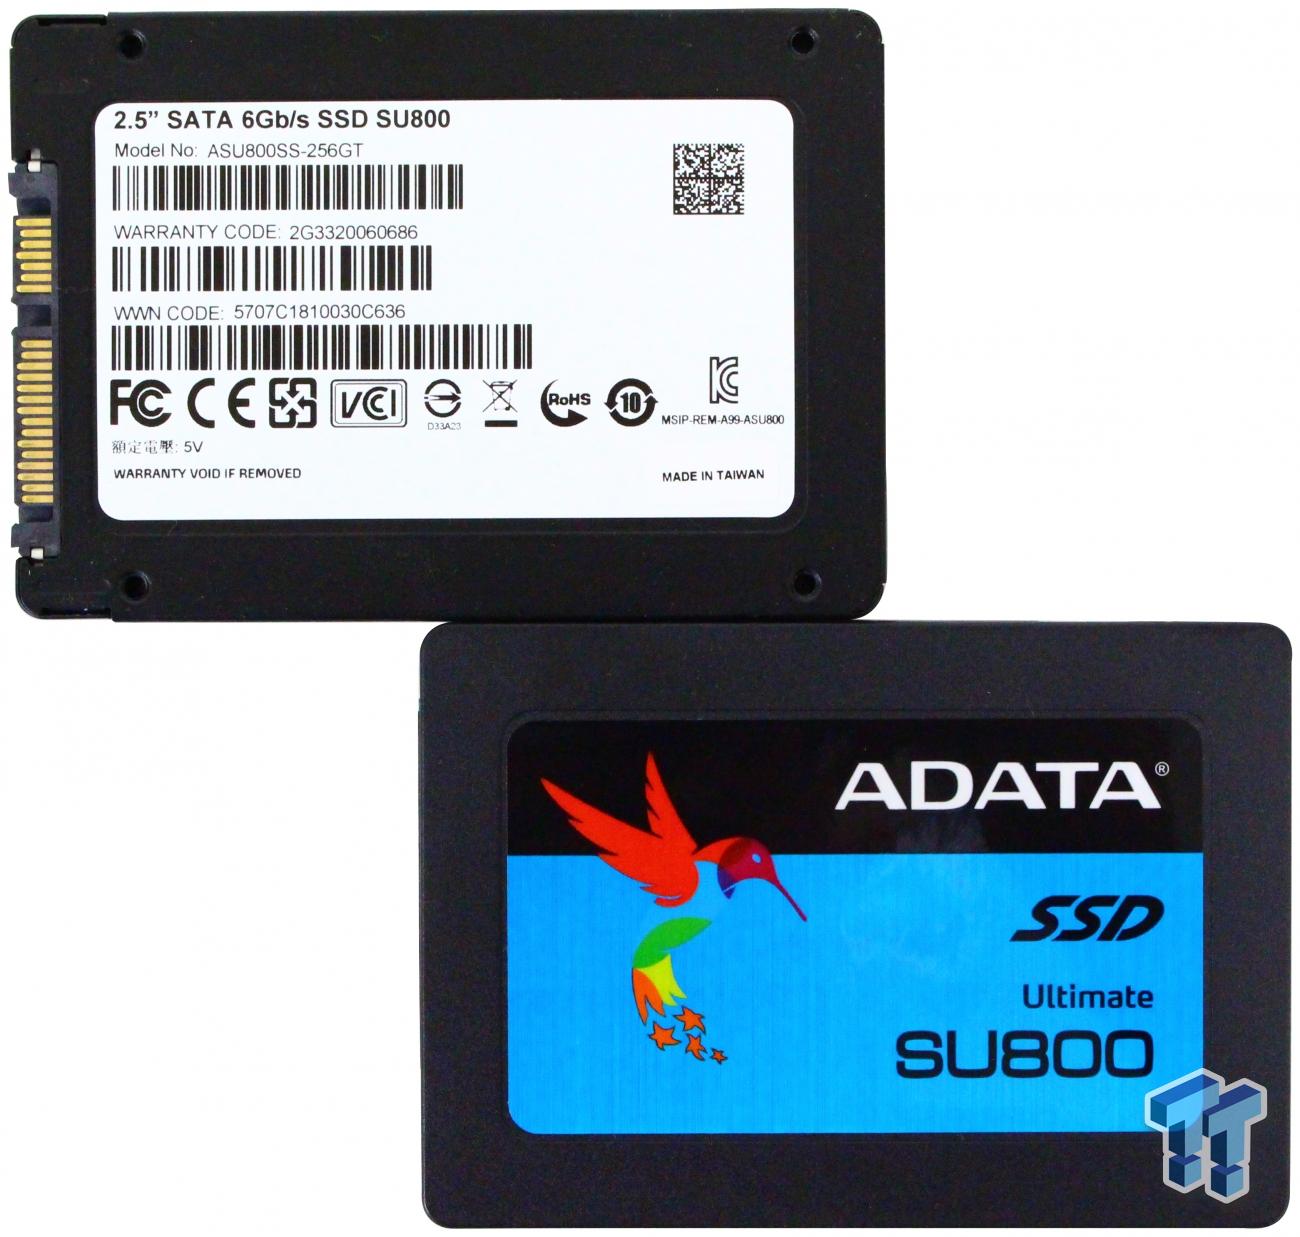 Youth Dial surprise ADATA Ultimate SU800 SATA III SSD Review